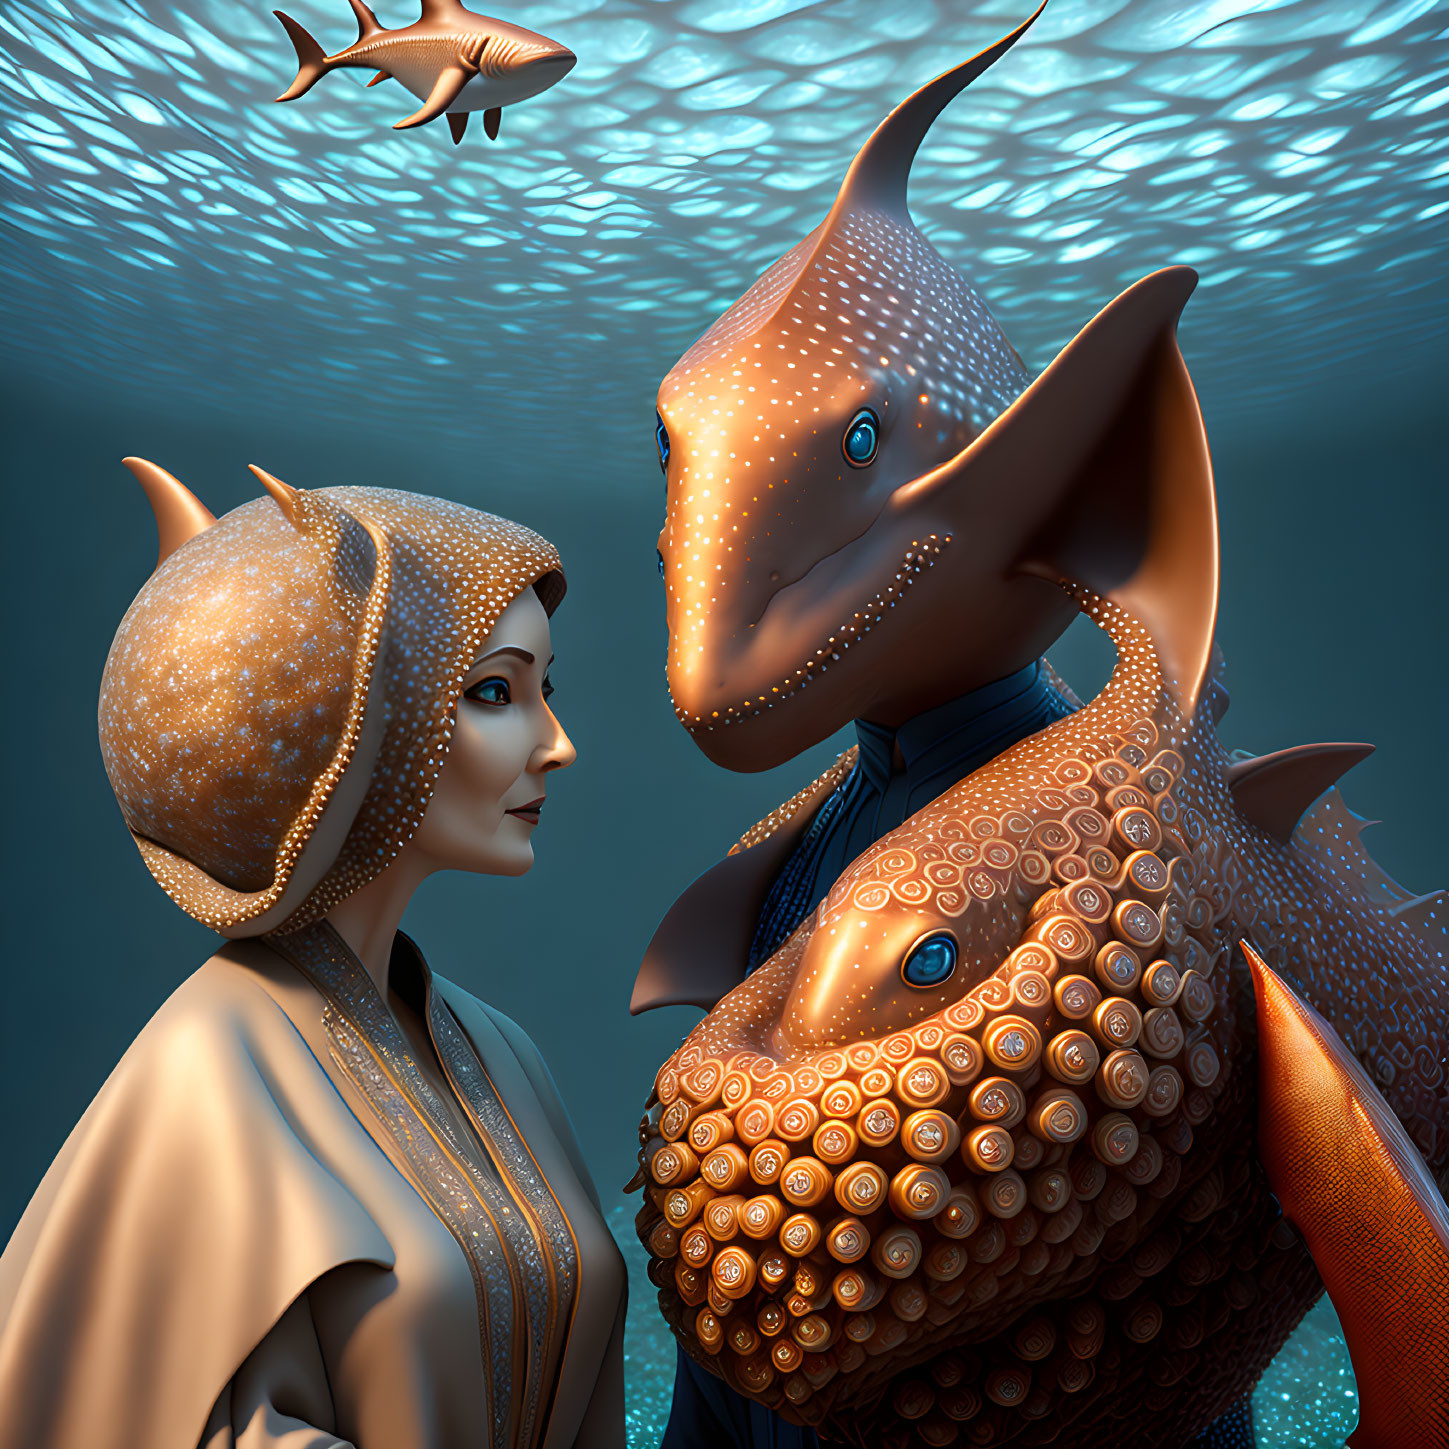 Stylized humanoid sea creatures with patterned skin underwater.